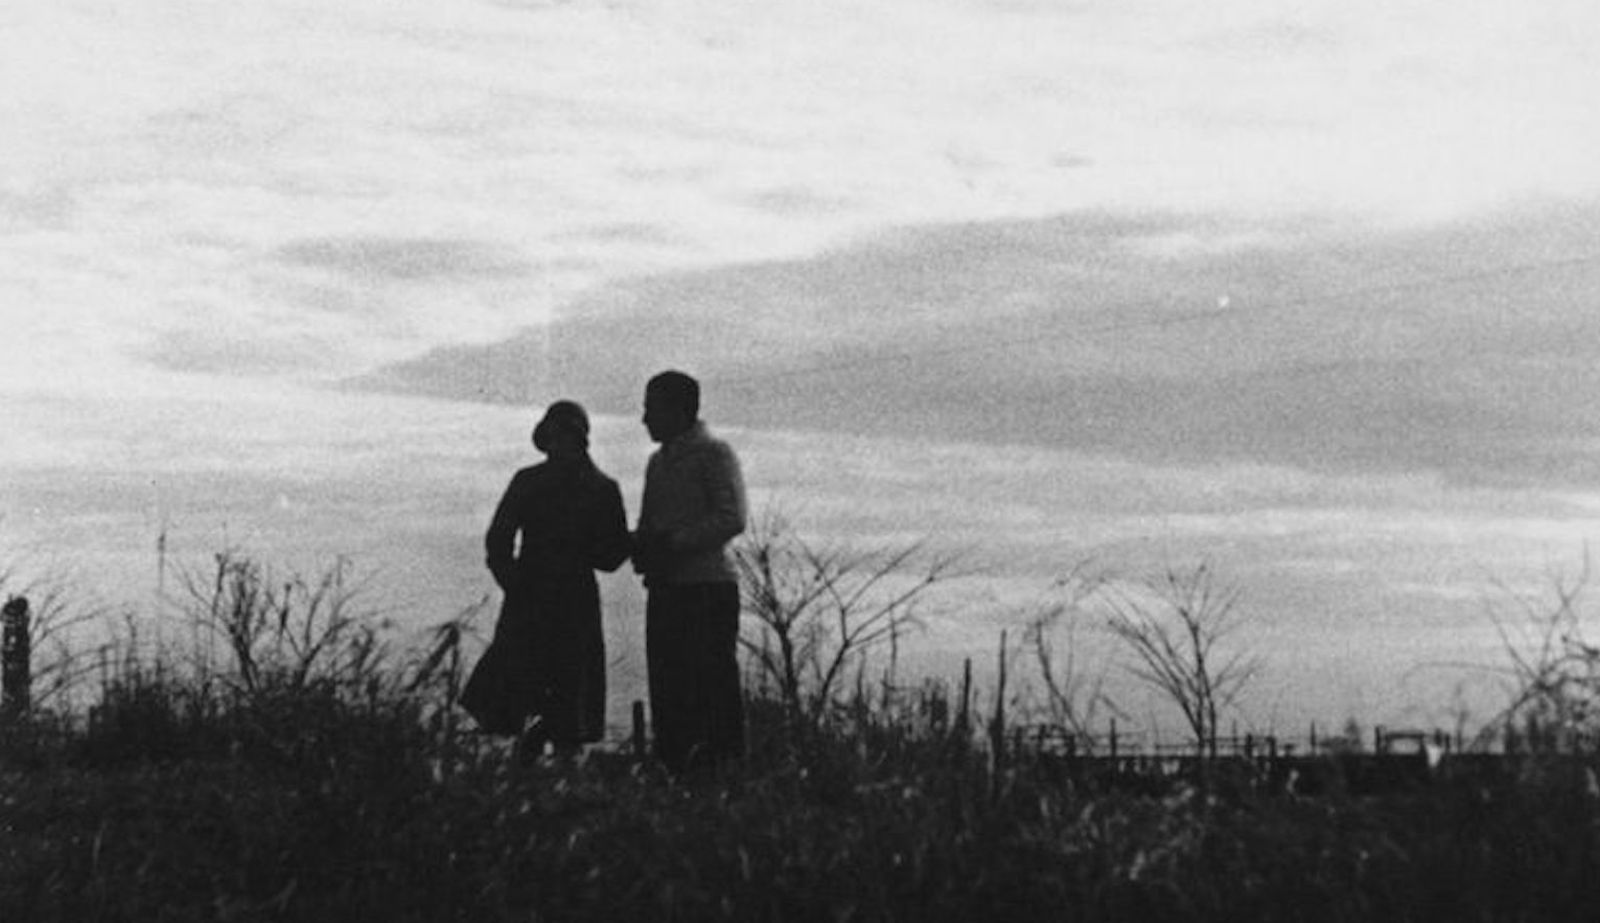 A black and white image of two human figures silhouetted against the sky standing amidst tall grasses